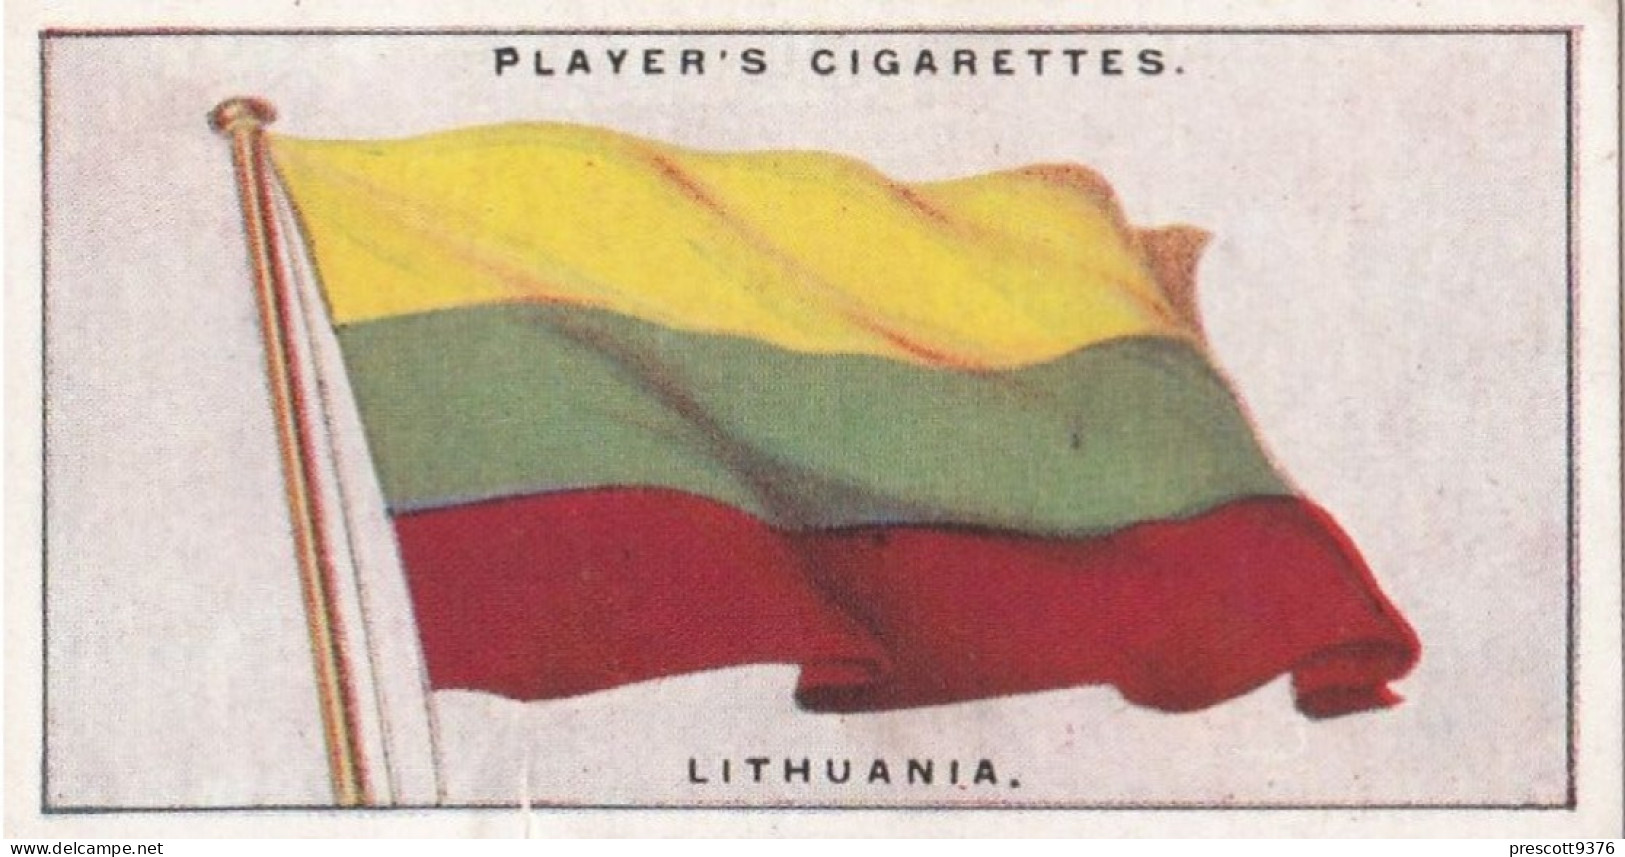 31 Lithuania - Flags Of The League  Of Nations 1928, Players Cigarettes, Original Card, - Player's